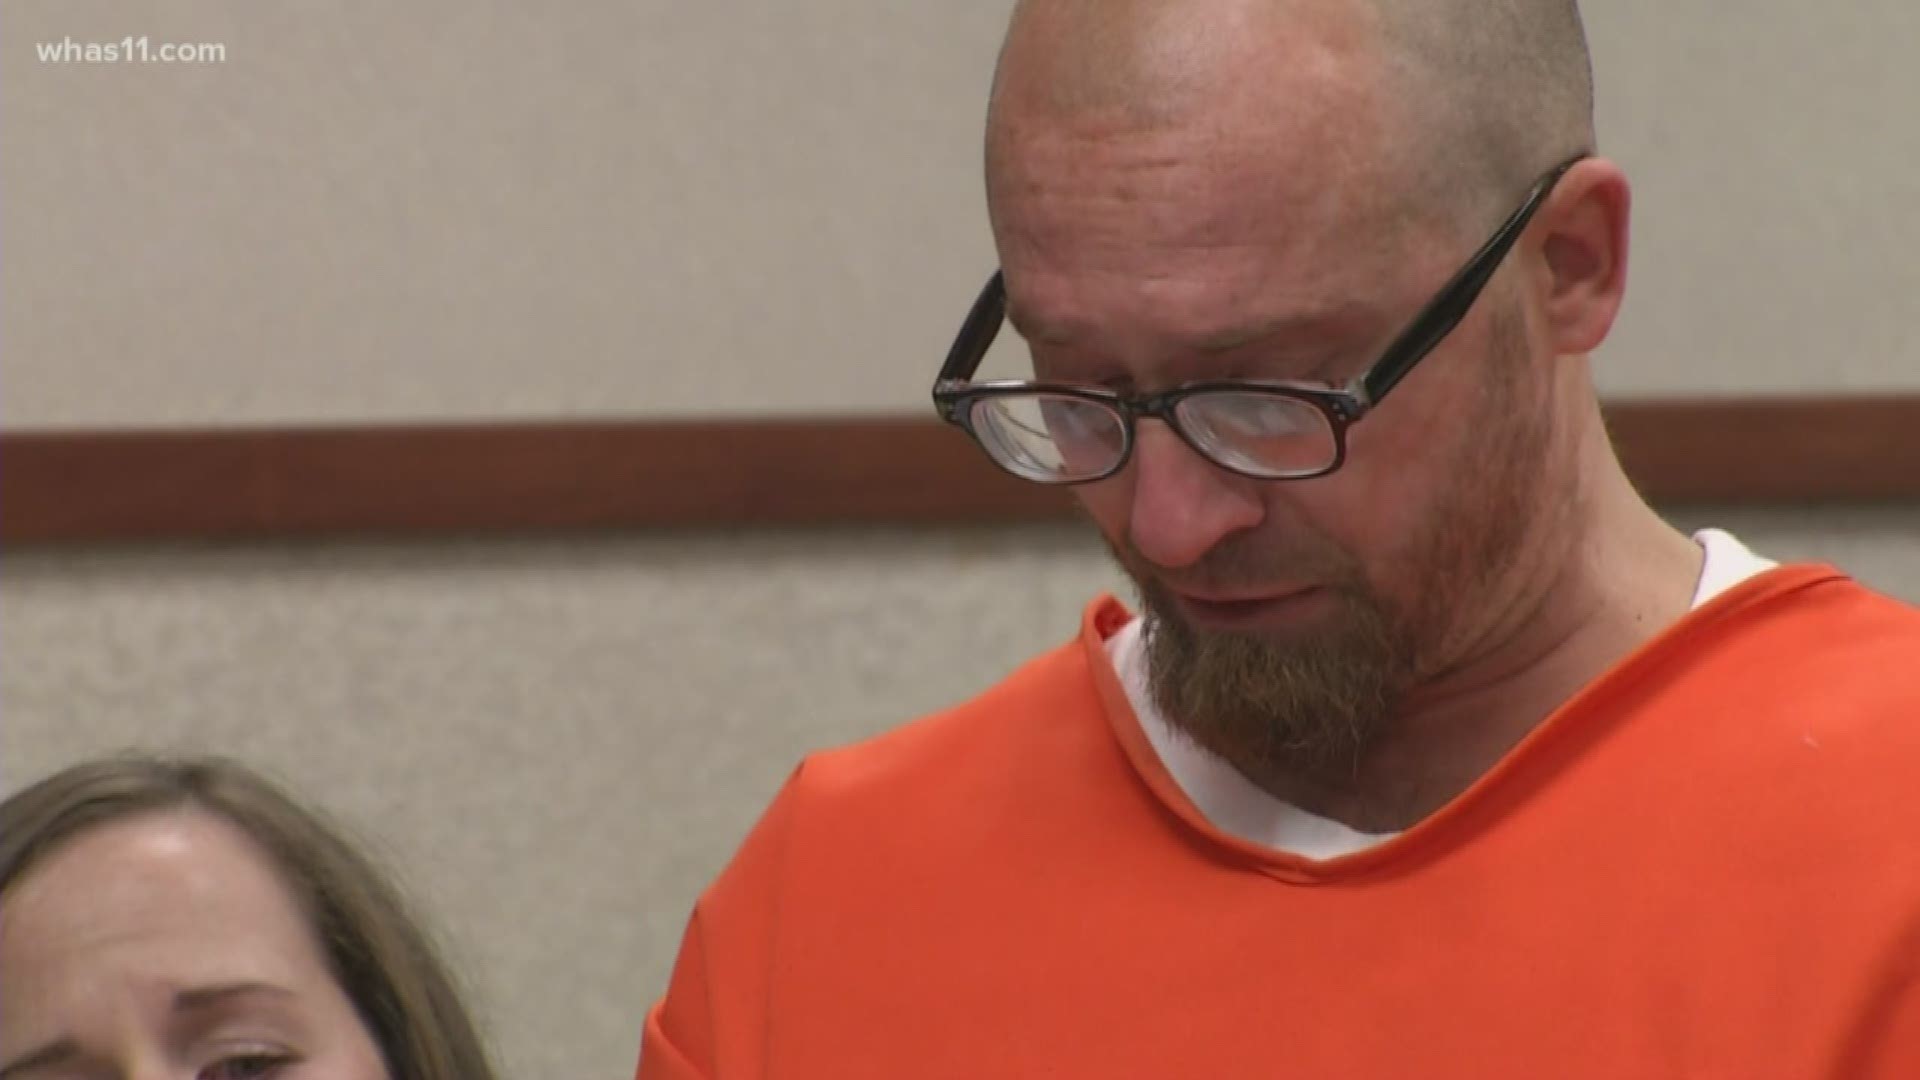 Chad Erdley asked for shock probation earlier this month, saying he has struggled with substance abuse his entire life and needs treatment instead of jail time.